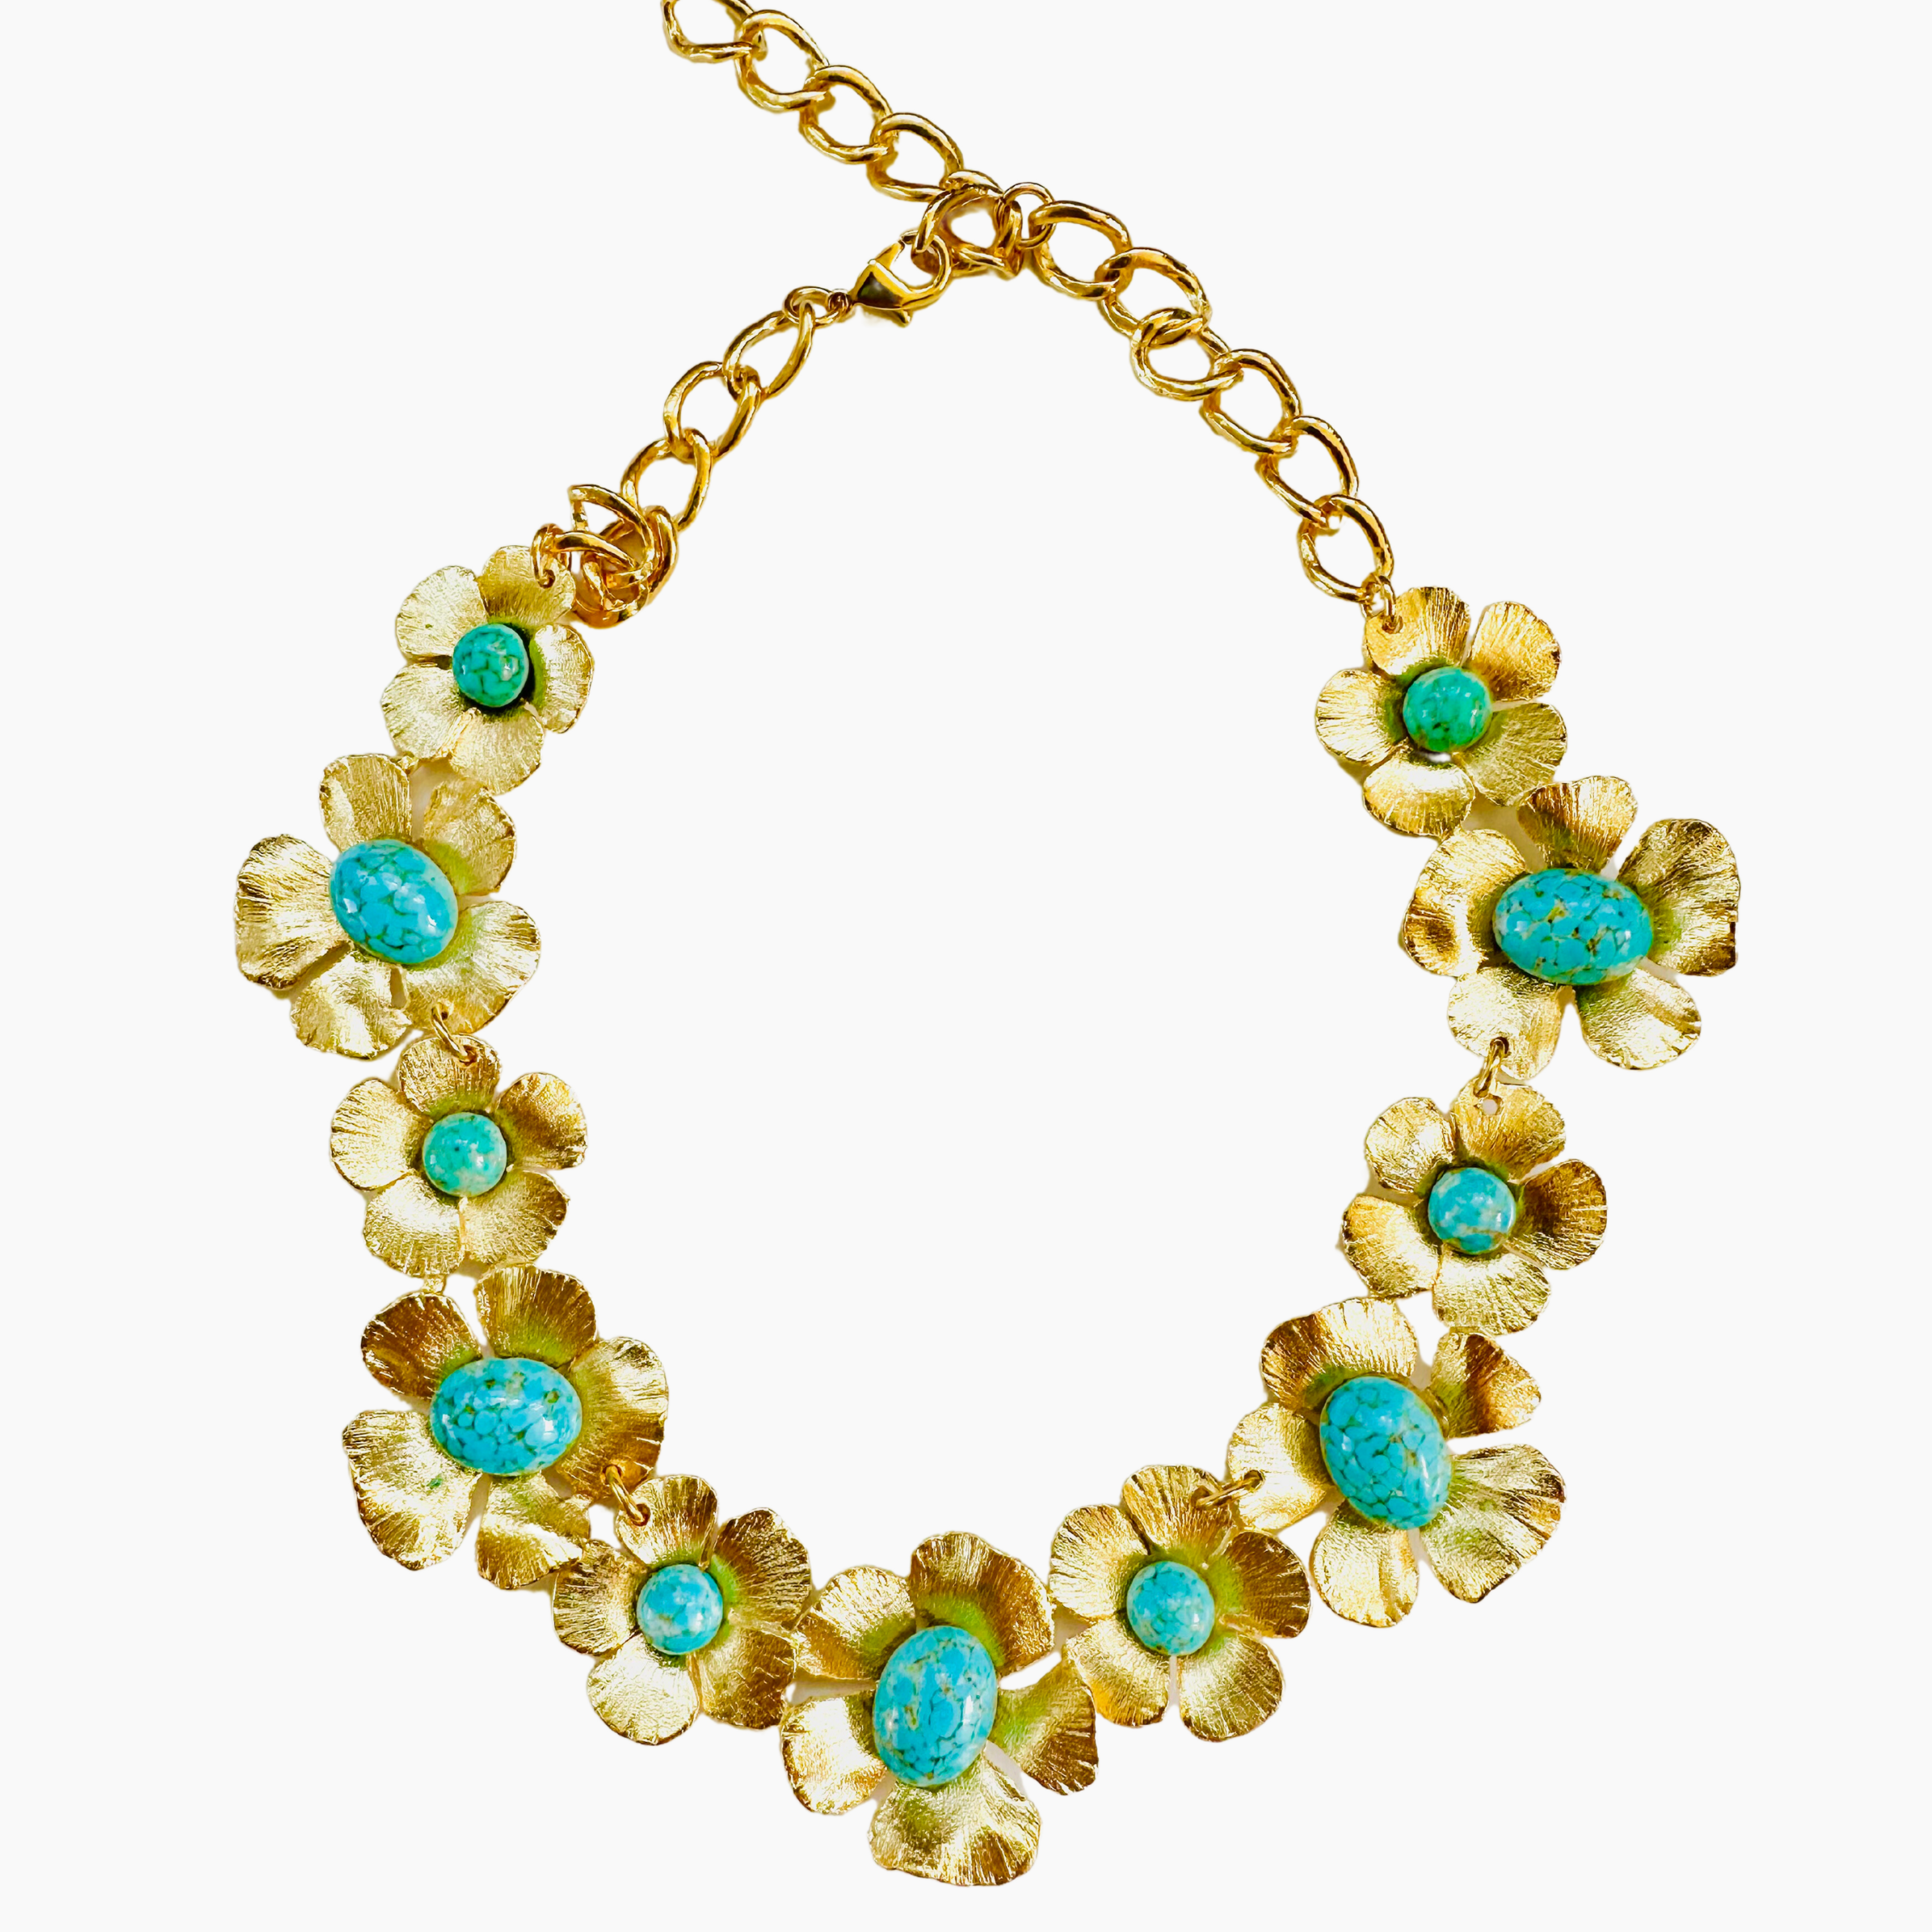 The Pink Reef Turquoise Floral Necklace